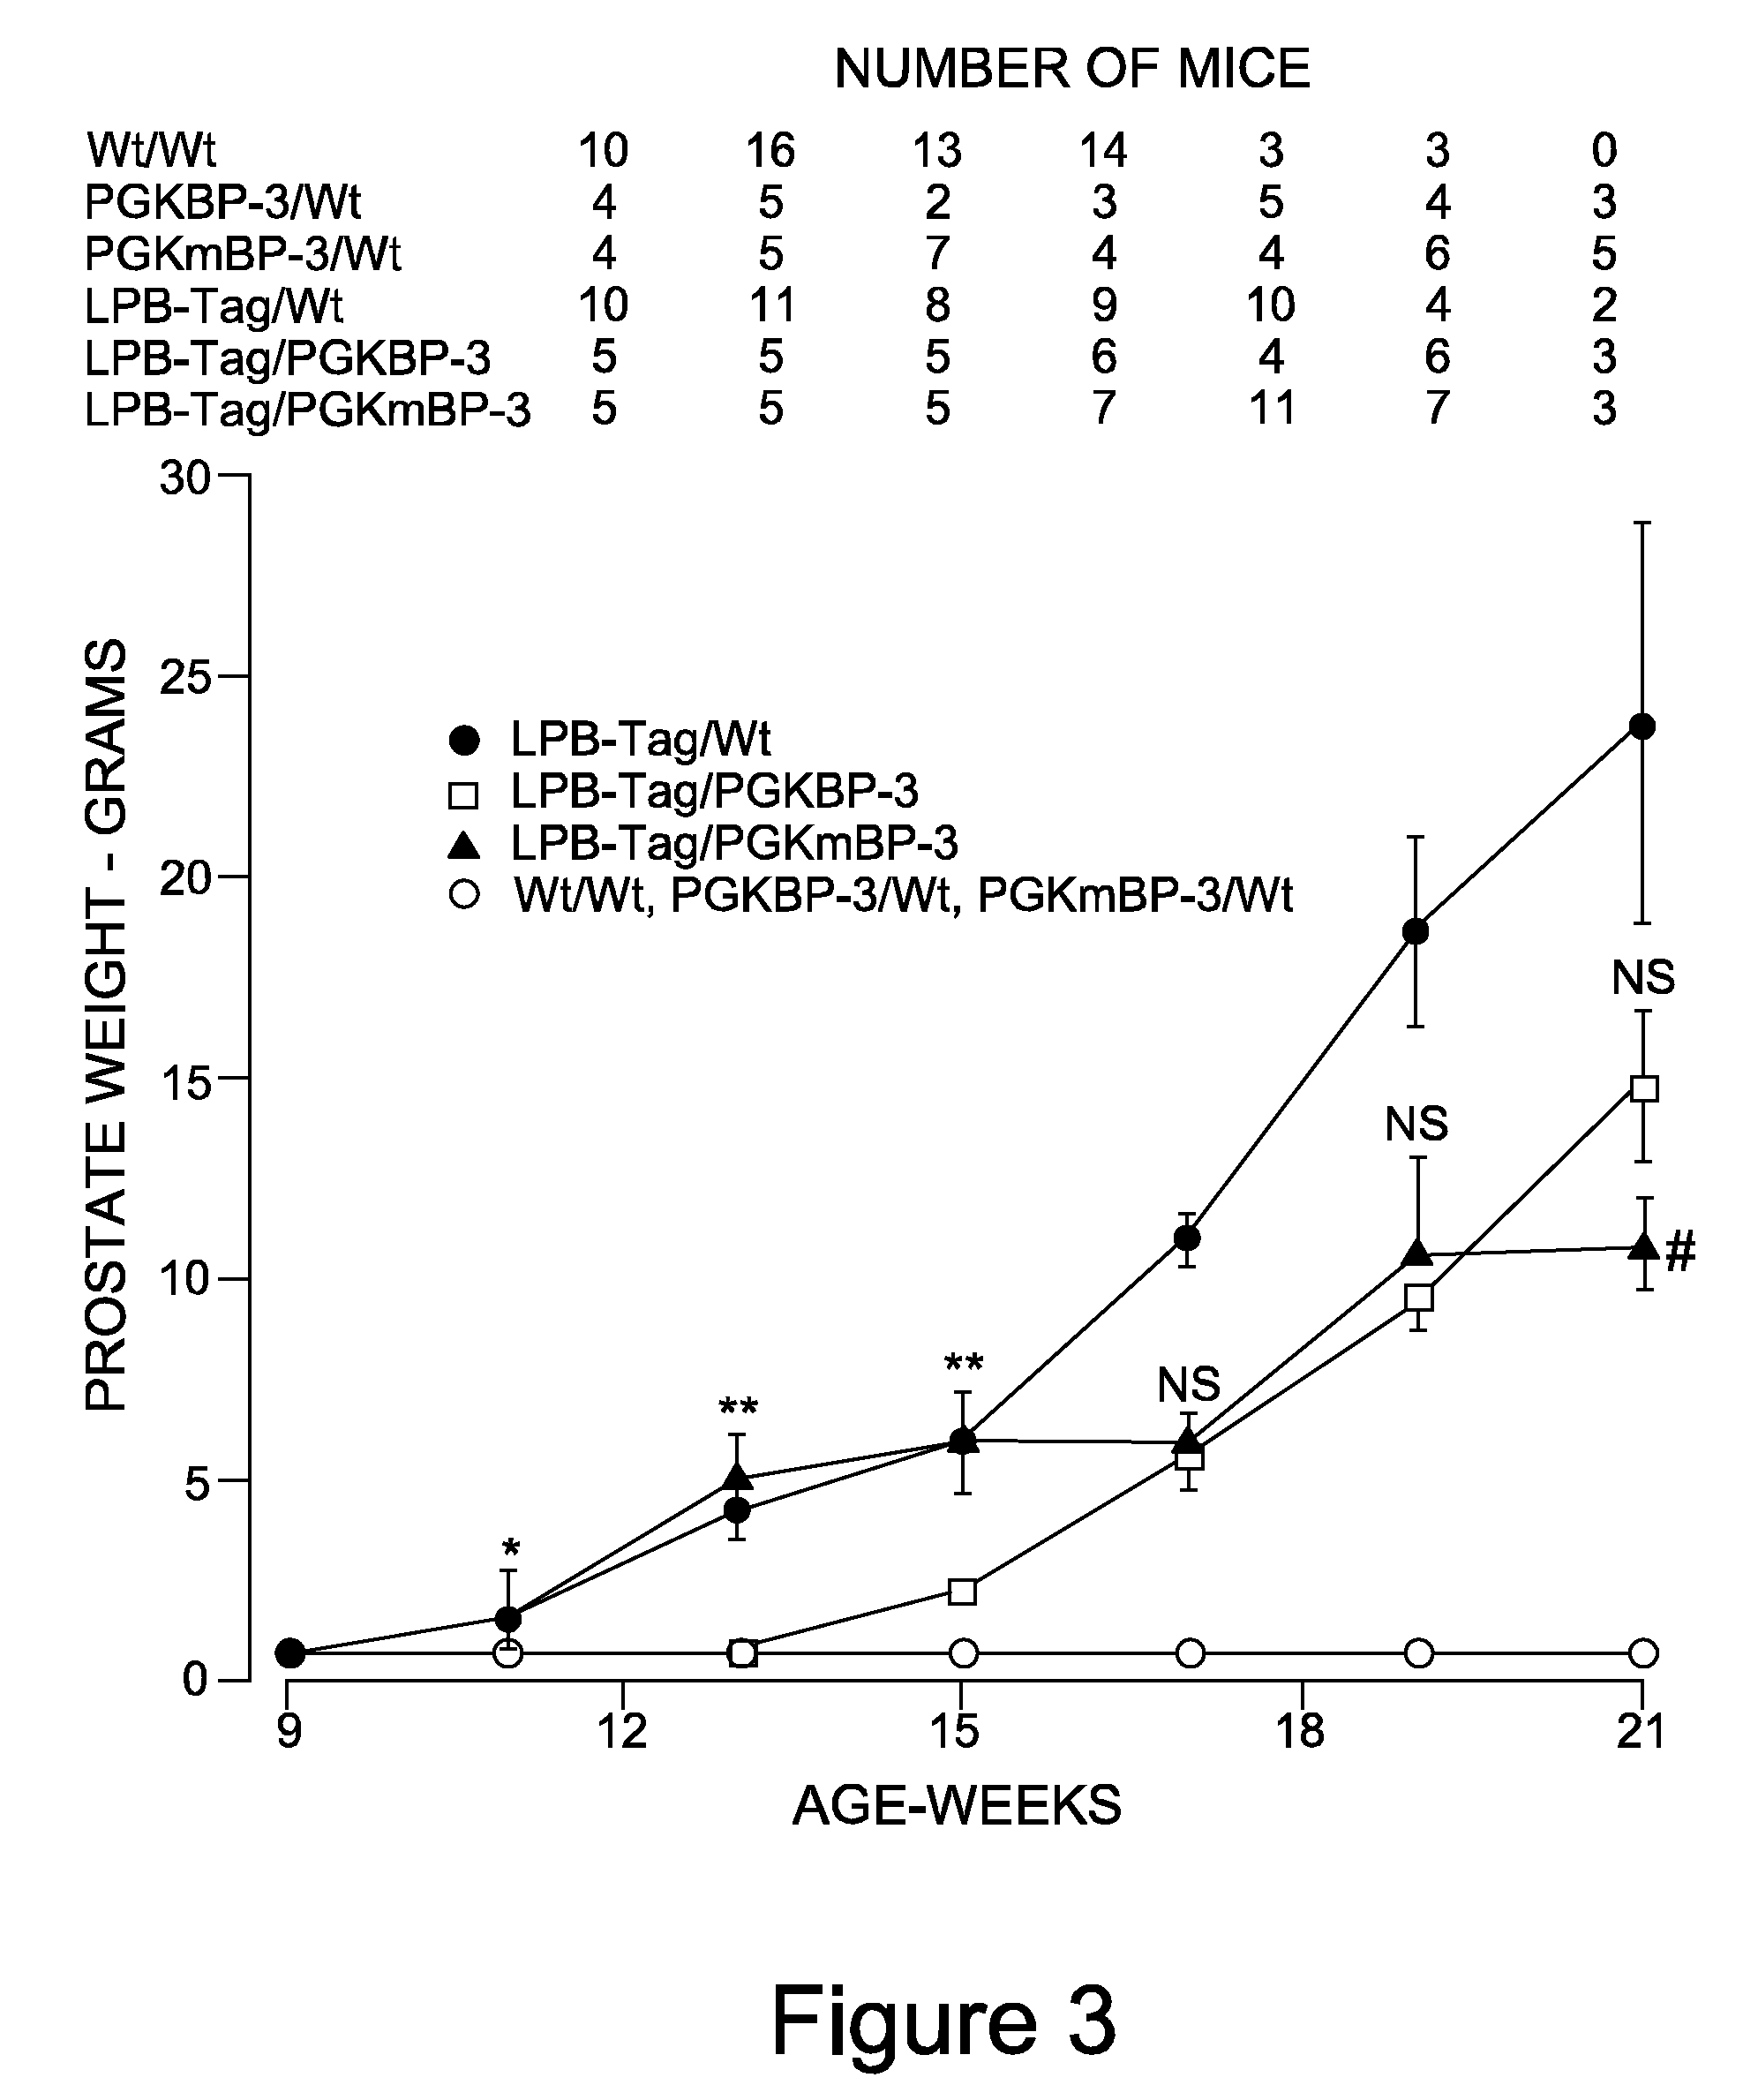 Methods Of Attenuating Prostate Tumor Growth By Insulin-Like Growth Factor Binding Protein-3 (IGFBP-3)